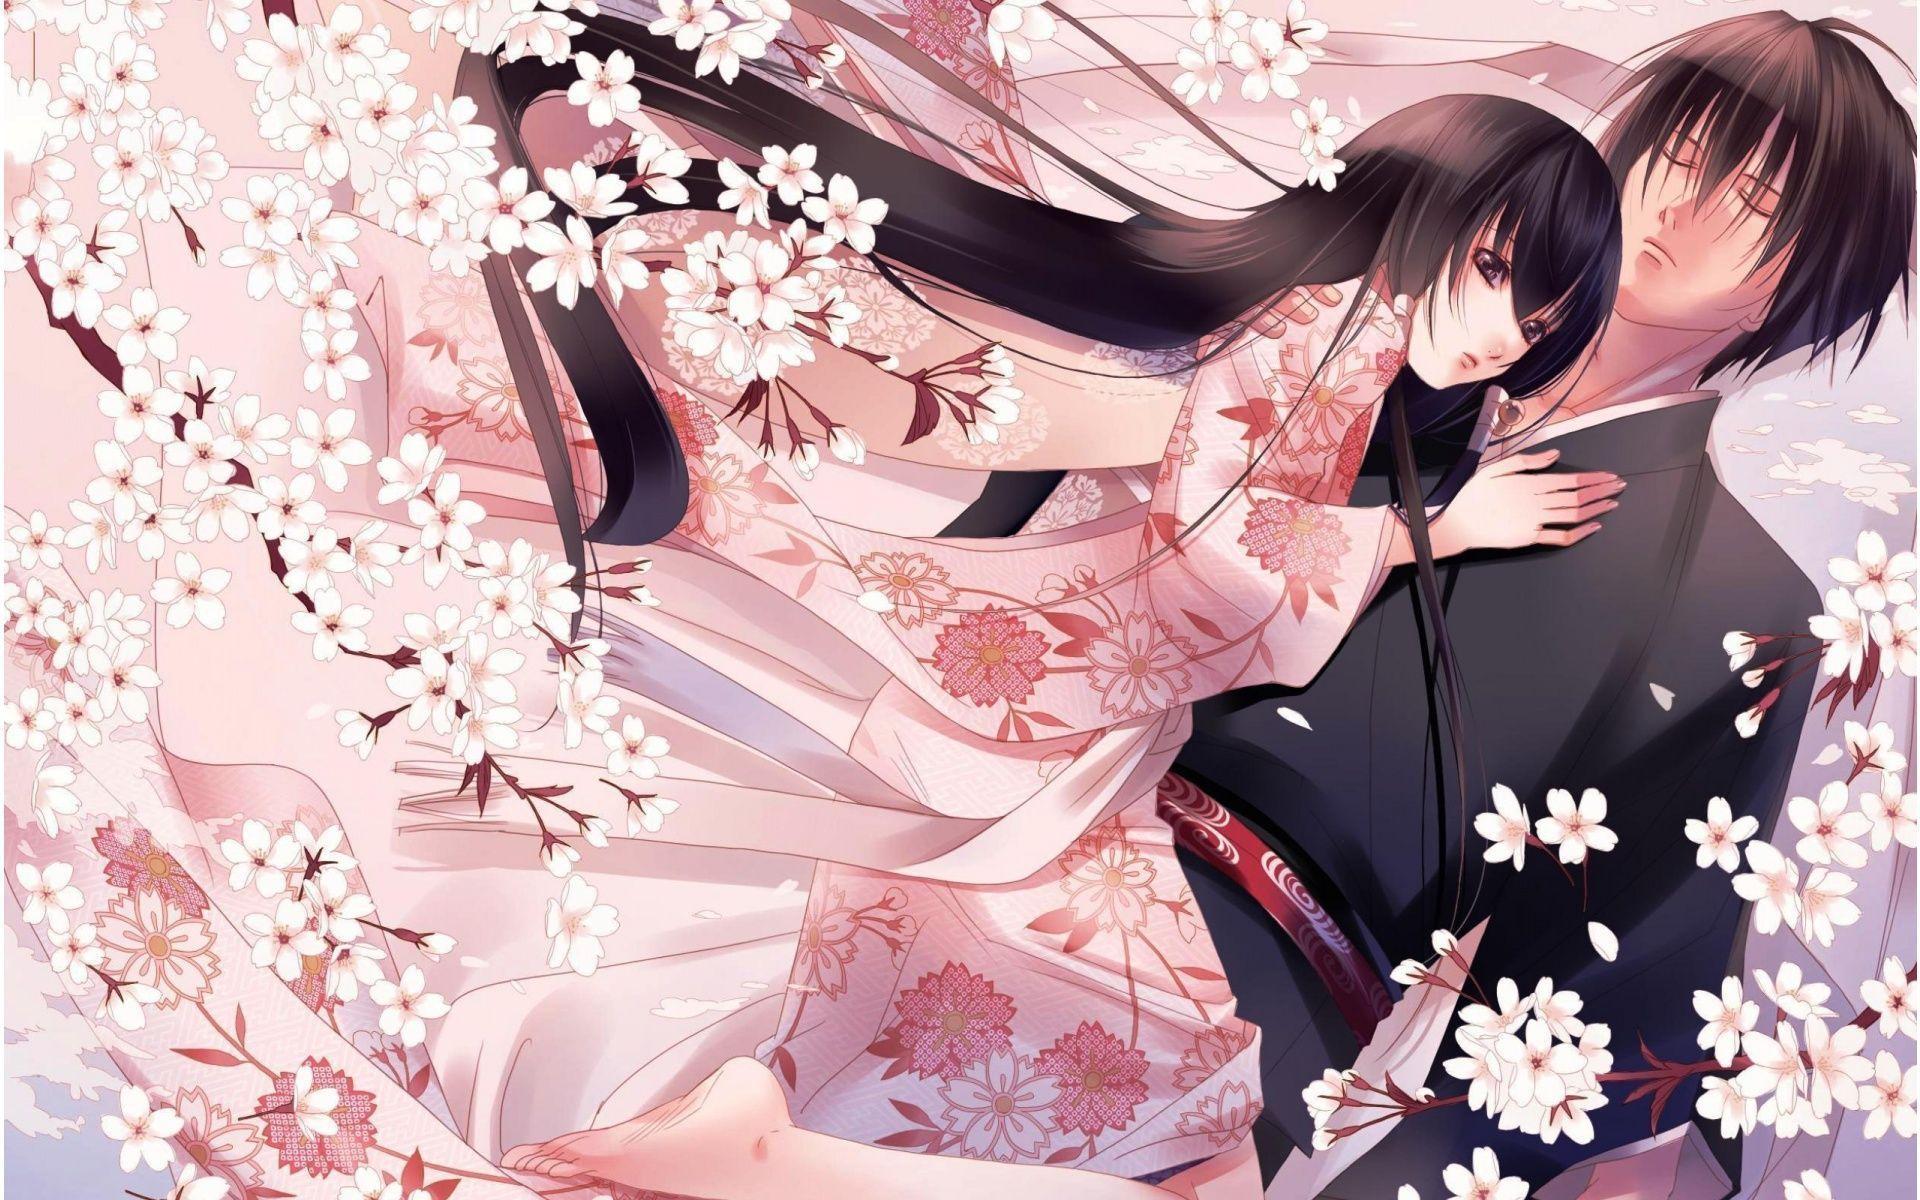 Anime Couple Wallpapers - Wallpaper Cave